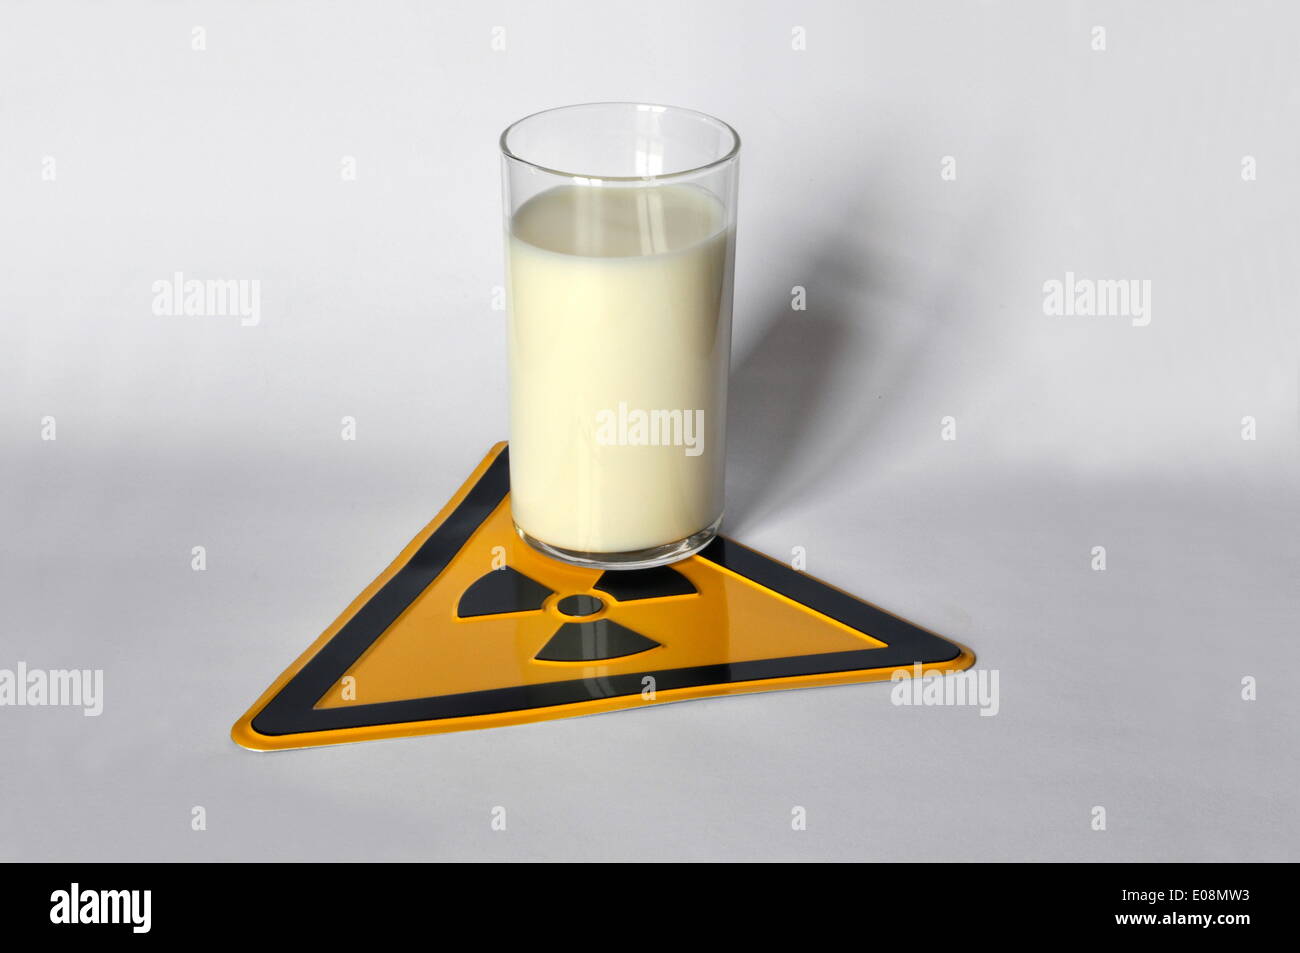 Illustration - A glass of milk stands on a adioactive trefoil sign in Germany, 03 April 2011. Fotoarchiv für ZeitgeschichteS. Steinach - NO WIRE SERVICE Stock Photo